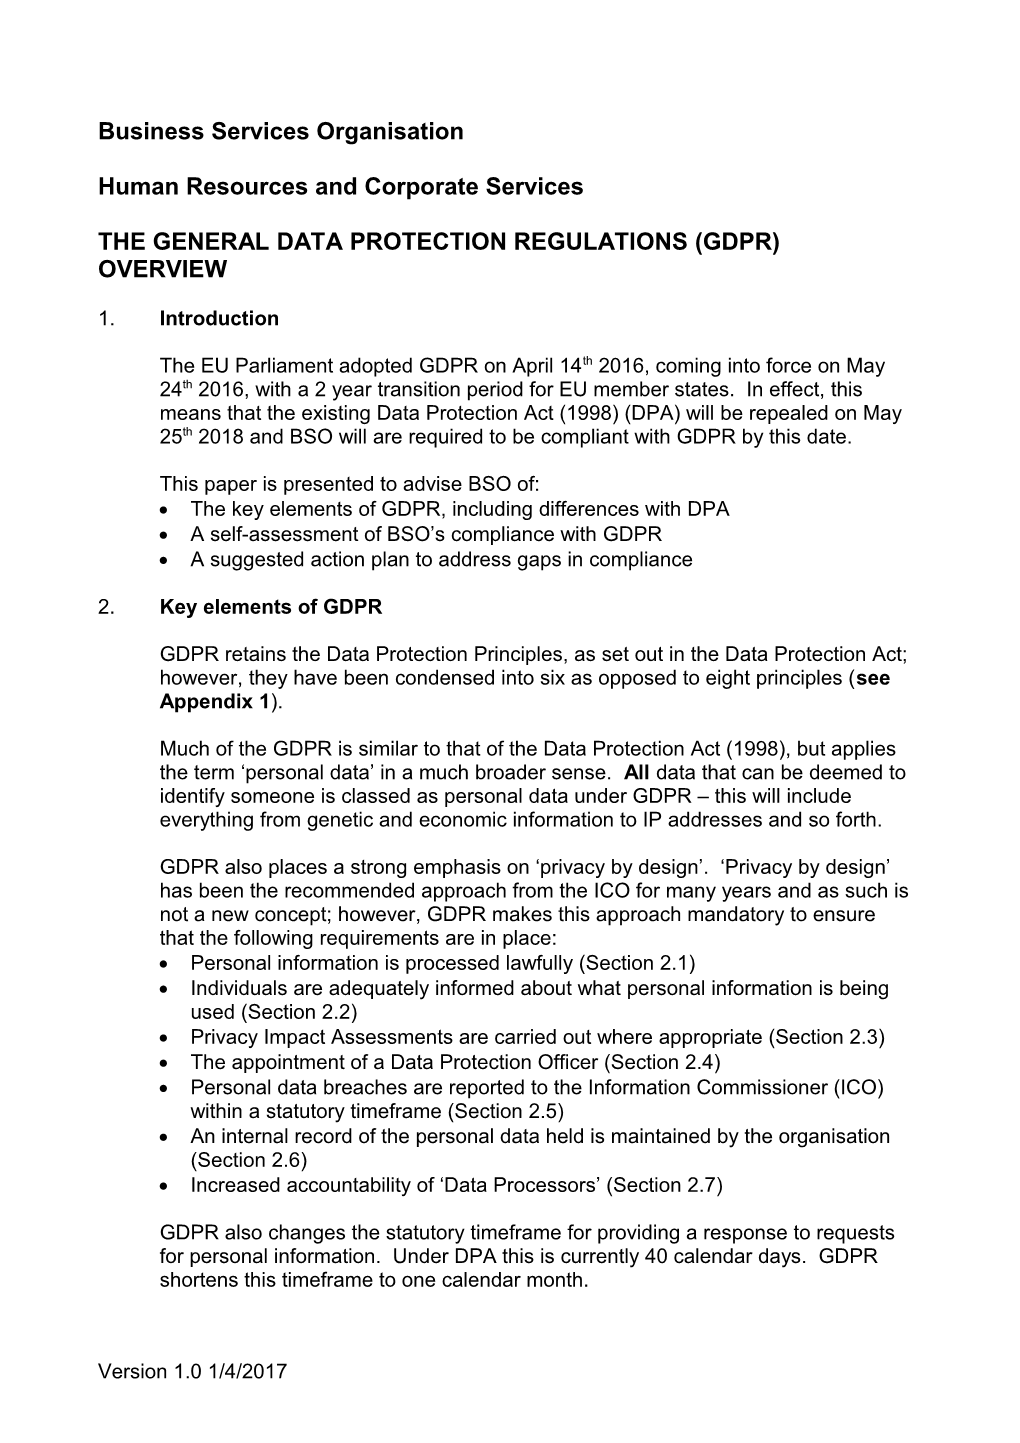 The General Data Protection Regulations (Gdpr) Overview